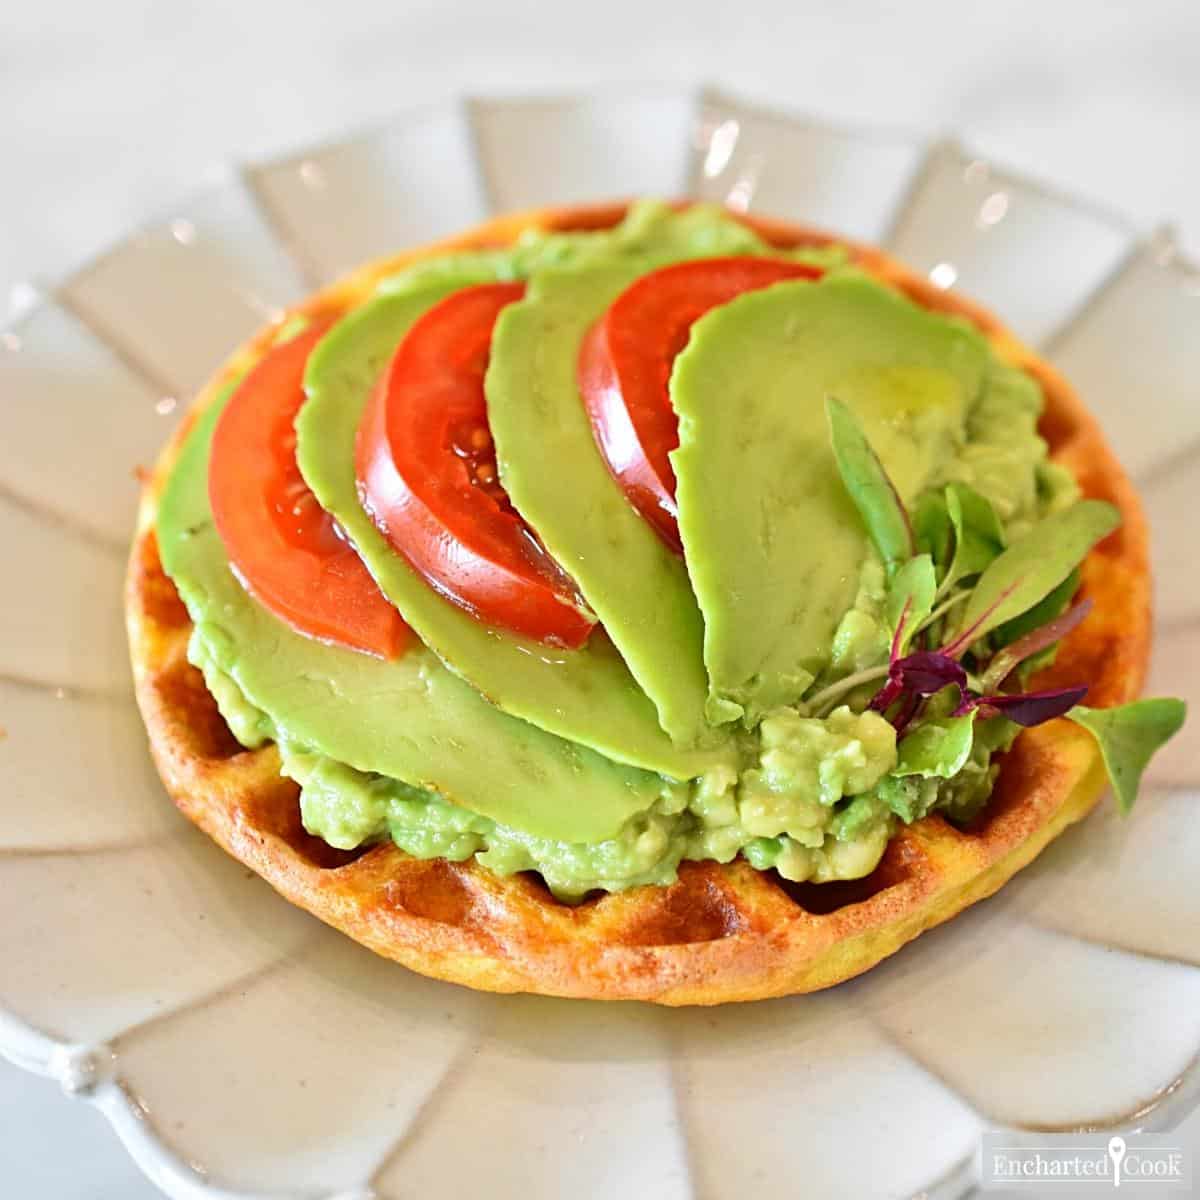 Mashed and sliced avocado with slices of tomato on a cheese waffle.